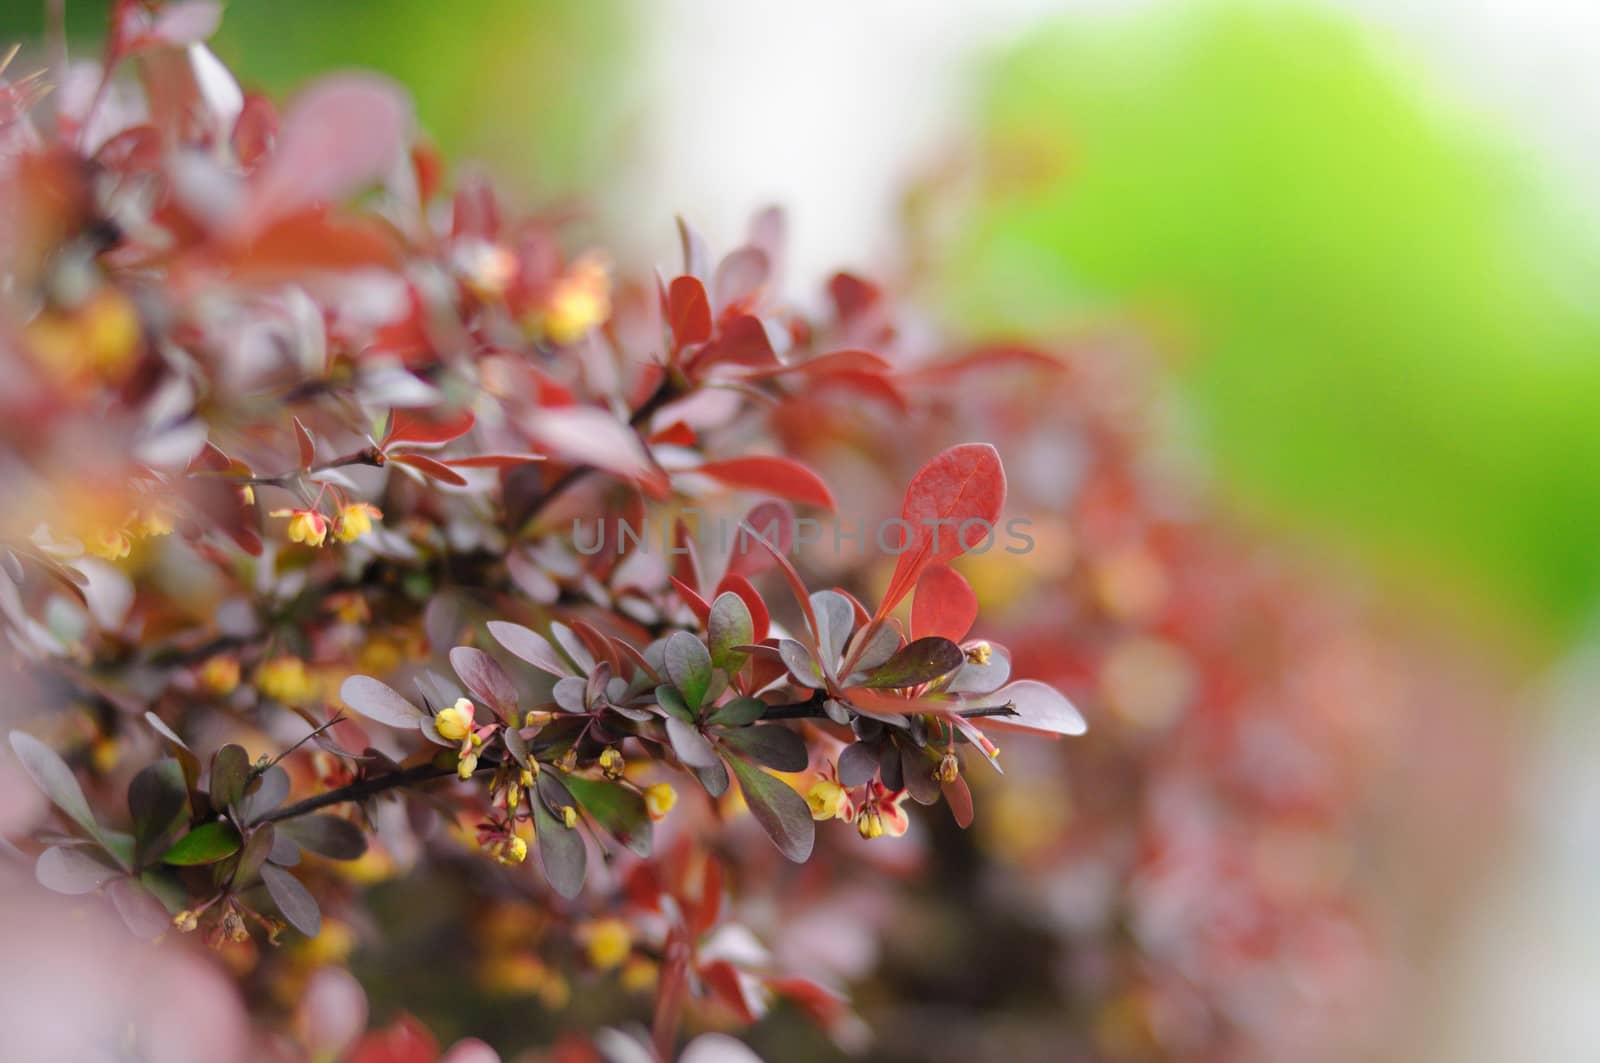 Colorful young leaves of a bush branch in Fulda, Hessen, Germany by Eagle2308